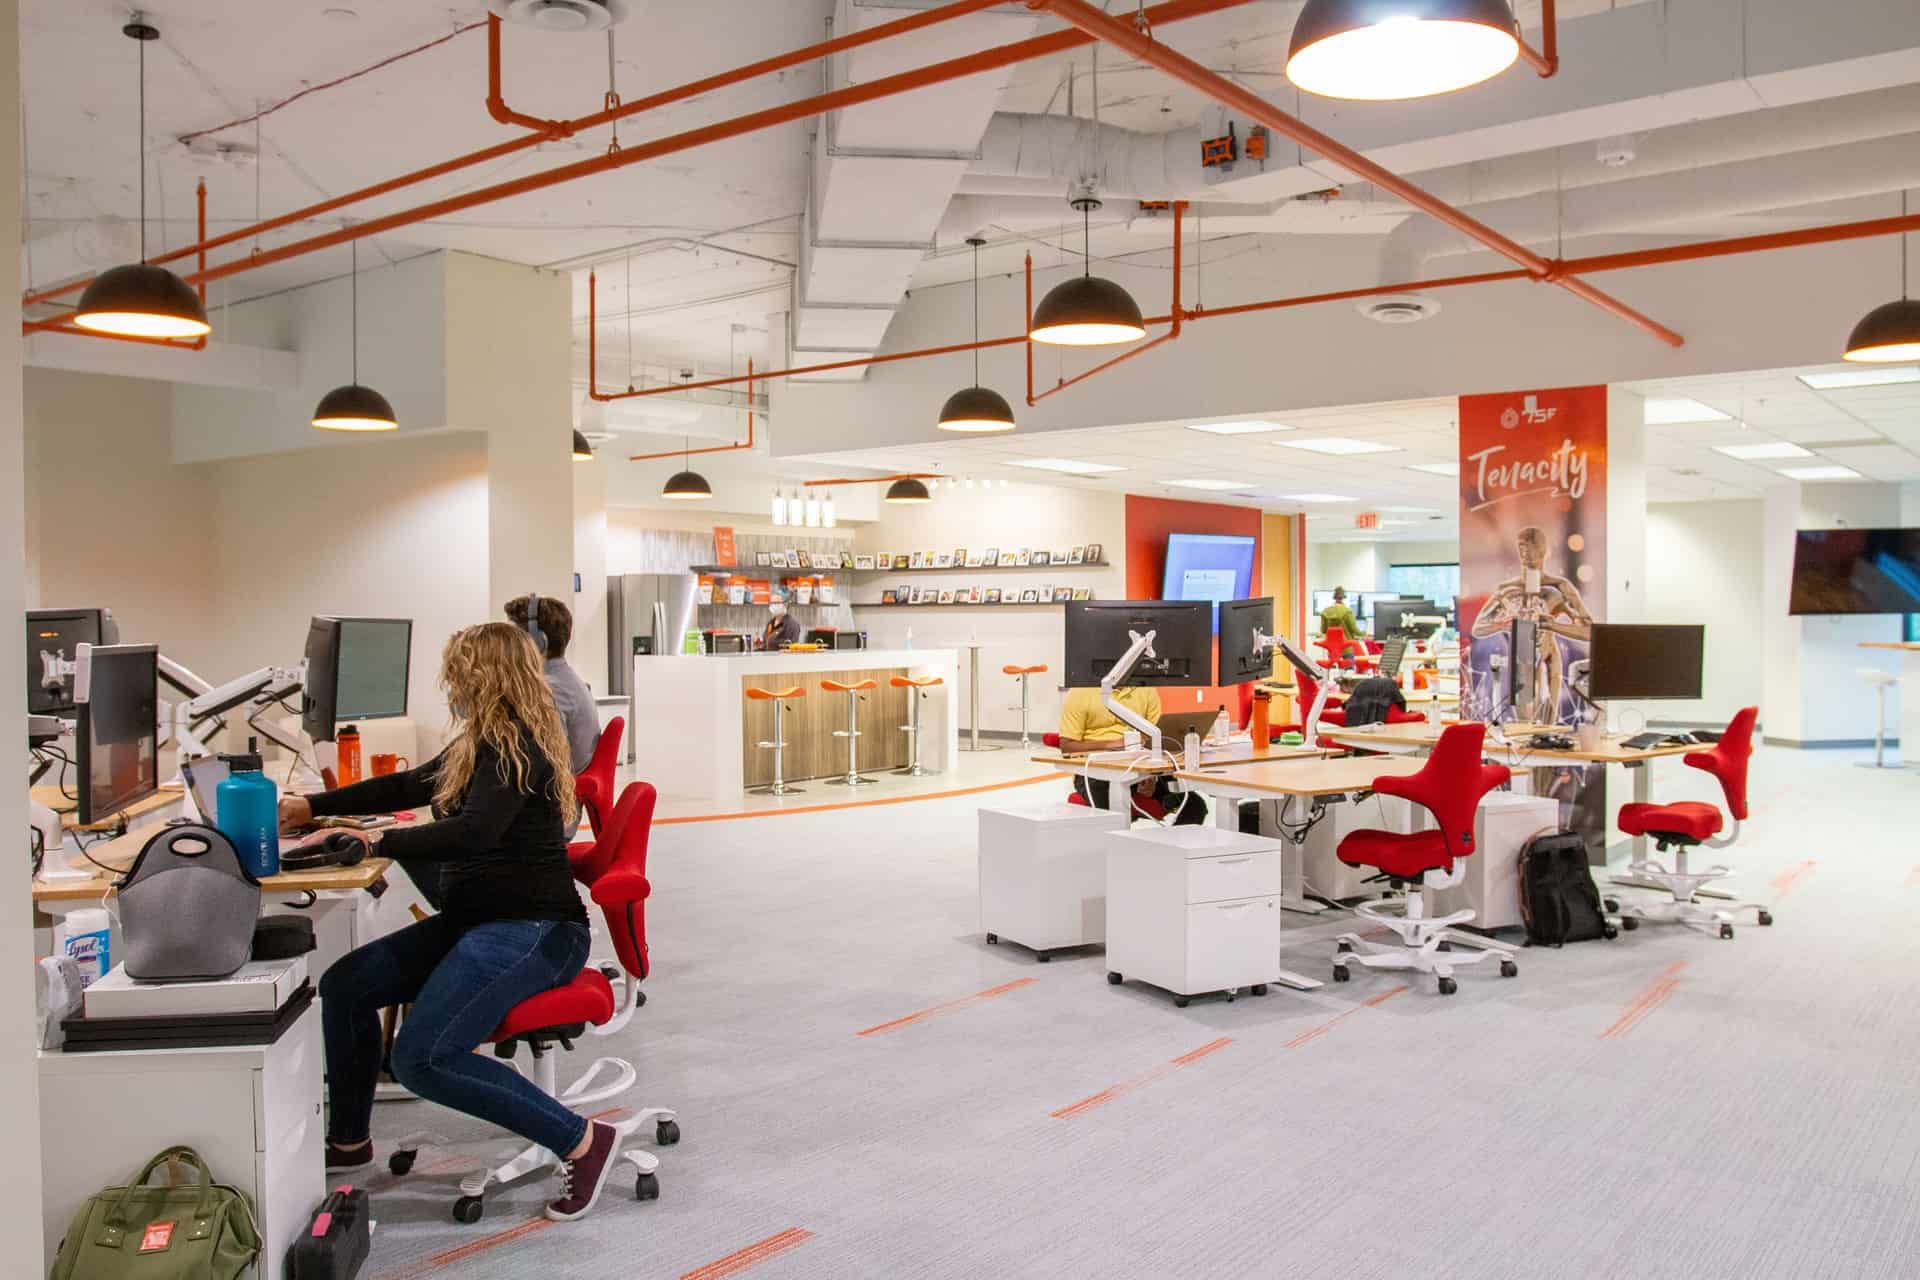 Smart office, or how to create an innovative office?